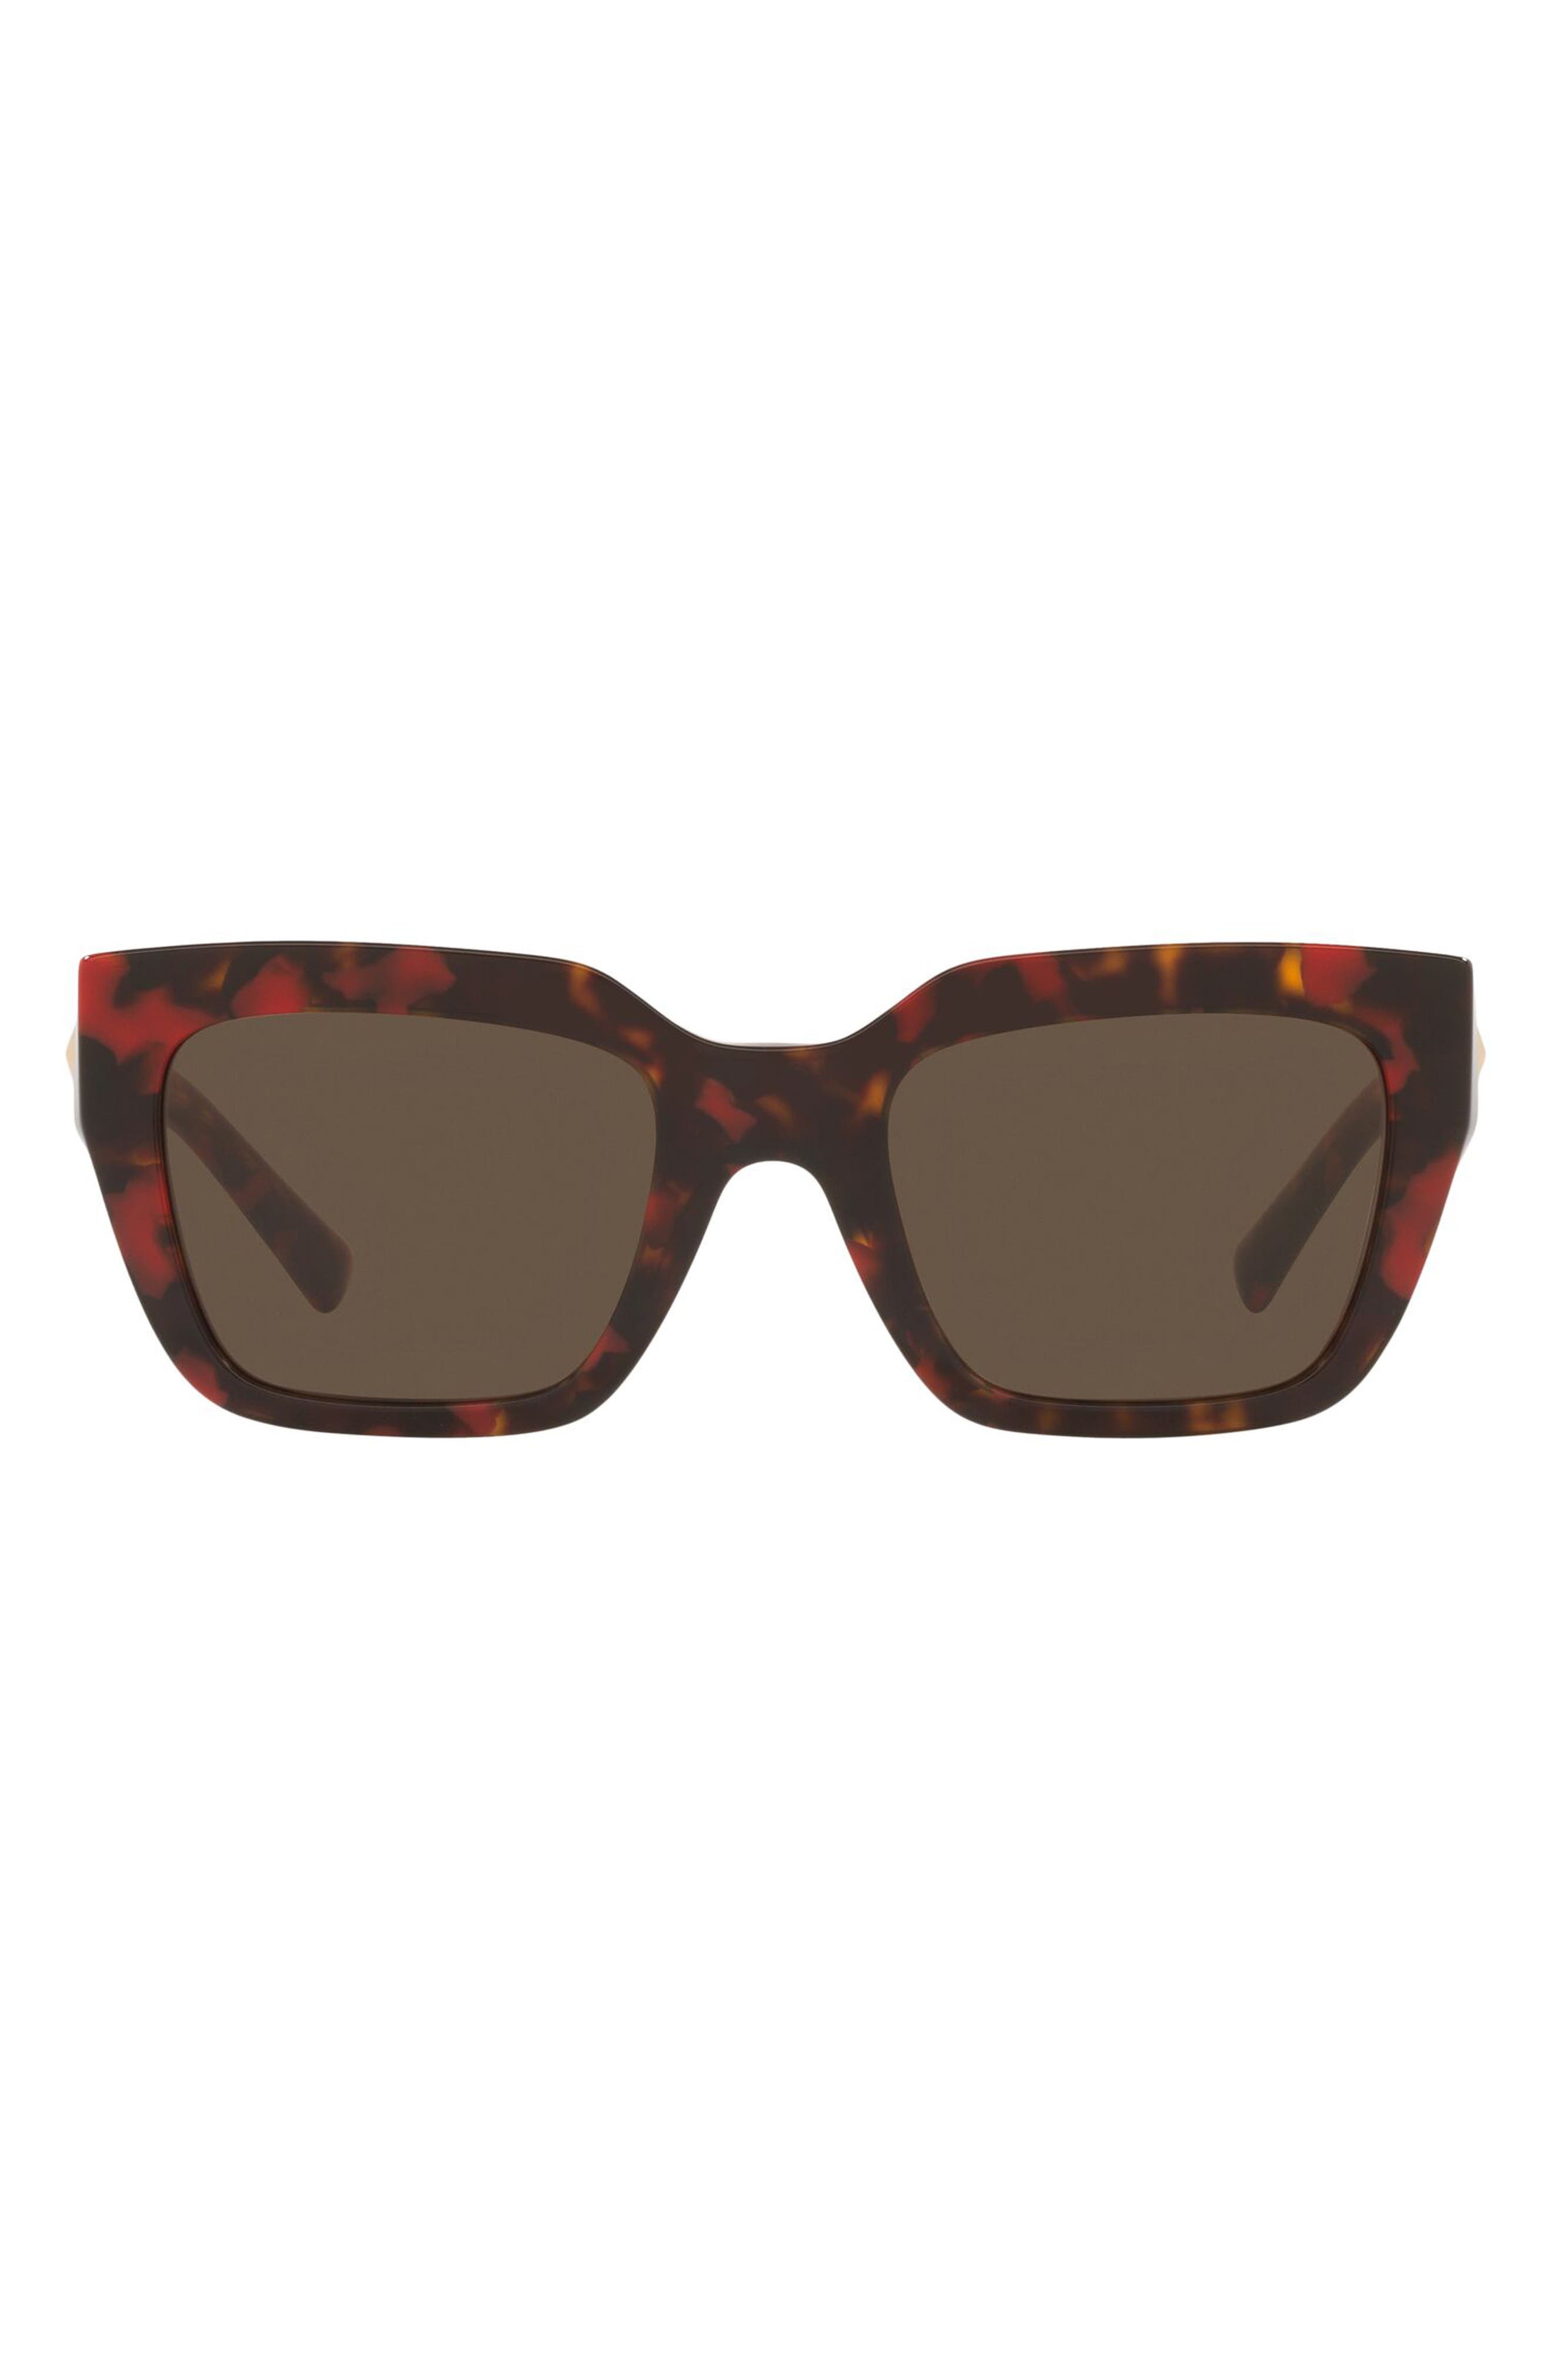 Valentino 52mm Square Sunglasses in Red Havana/Brown at Nordstrom